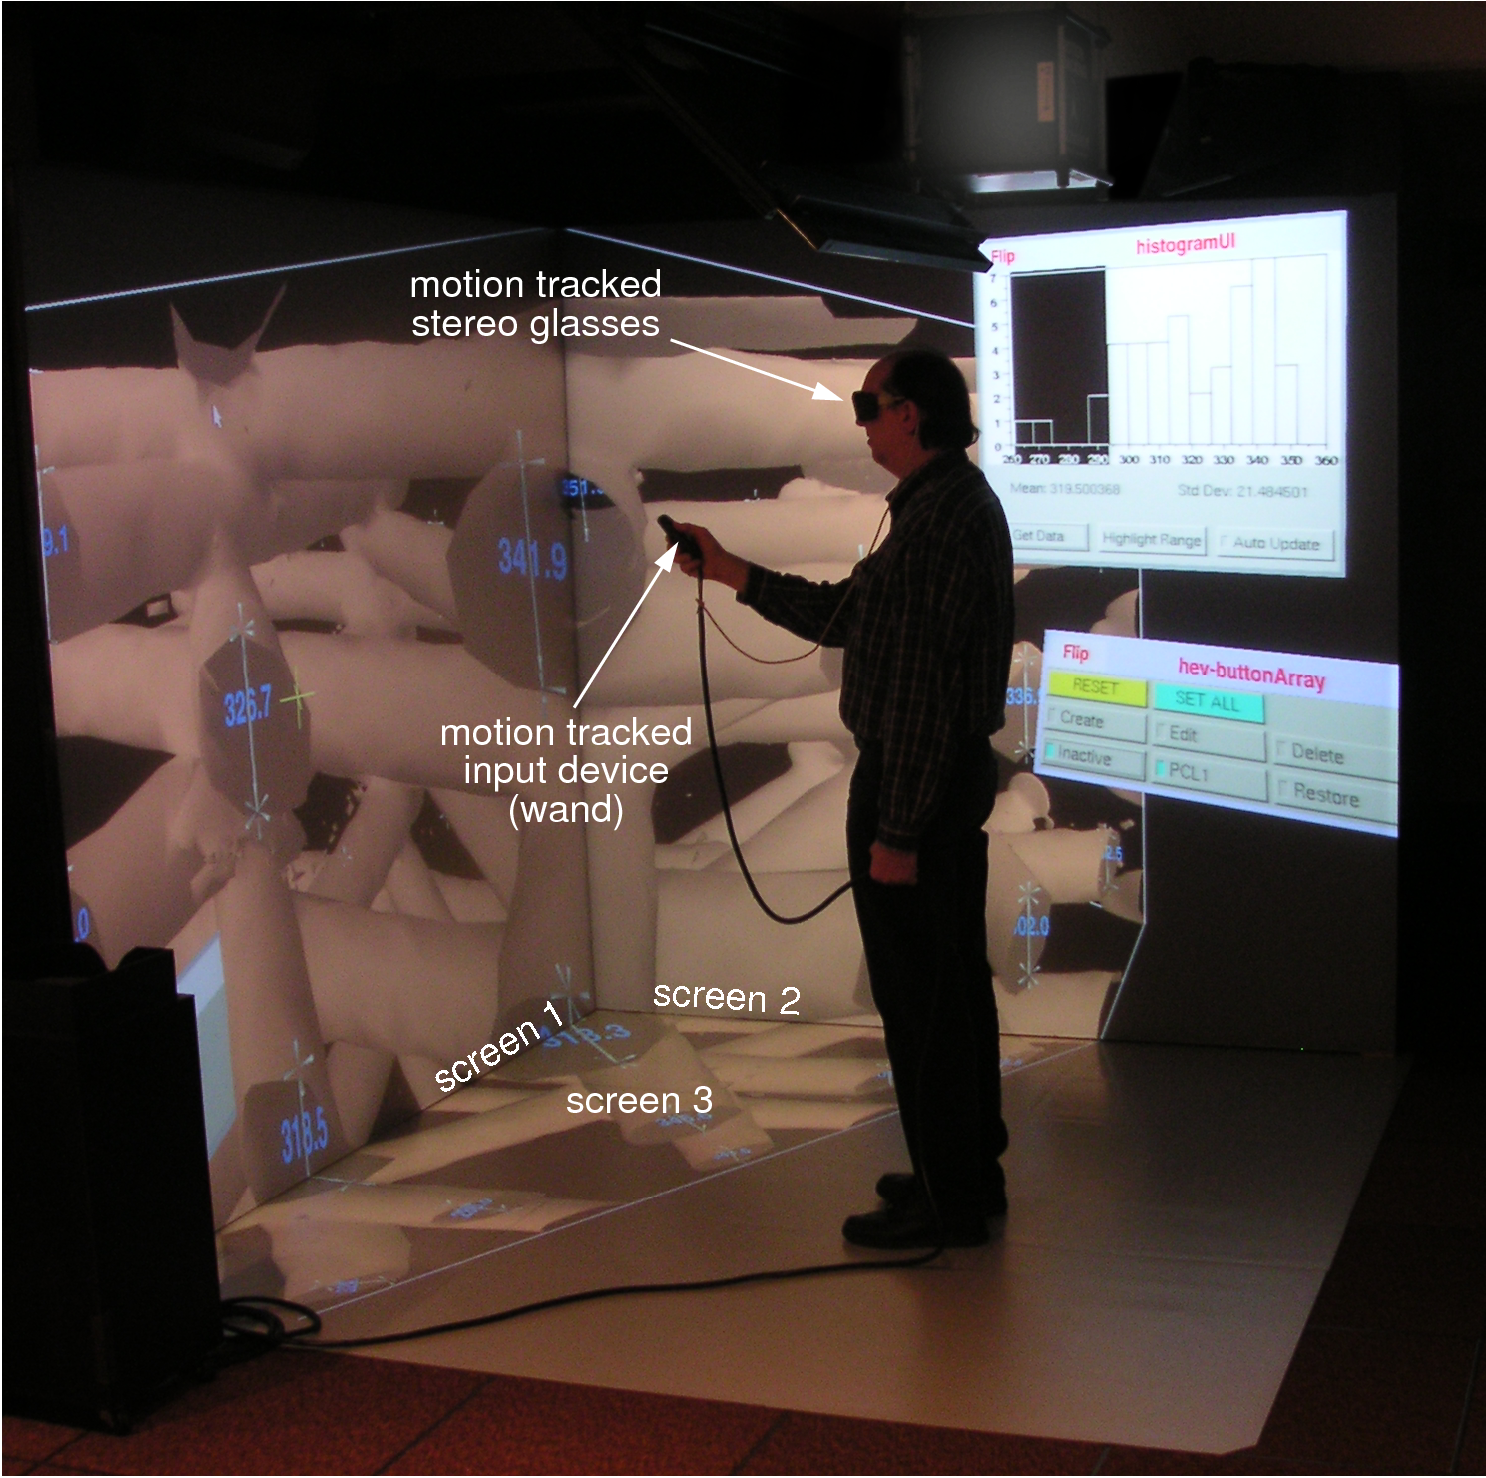  Interactive measurement and analysis in the immersive visualization environment
